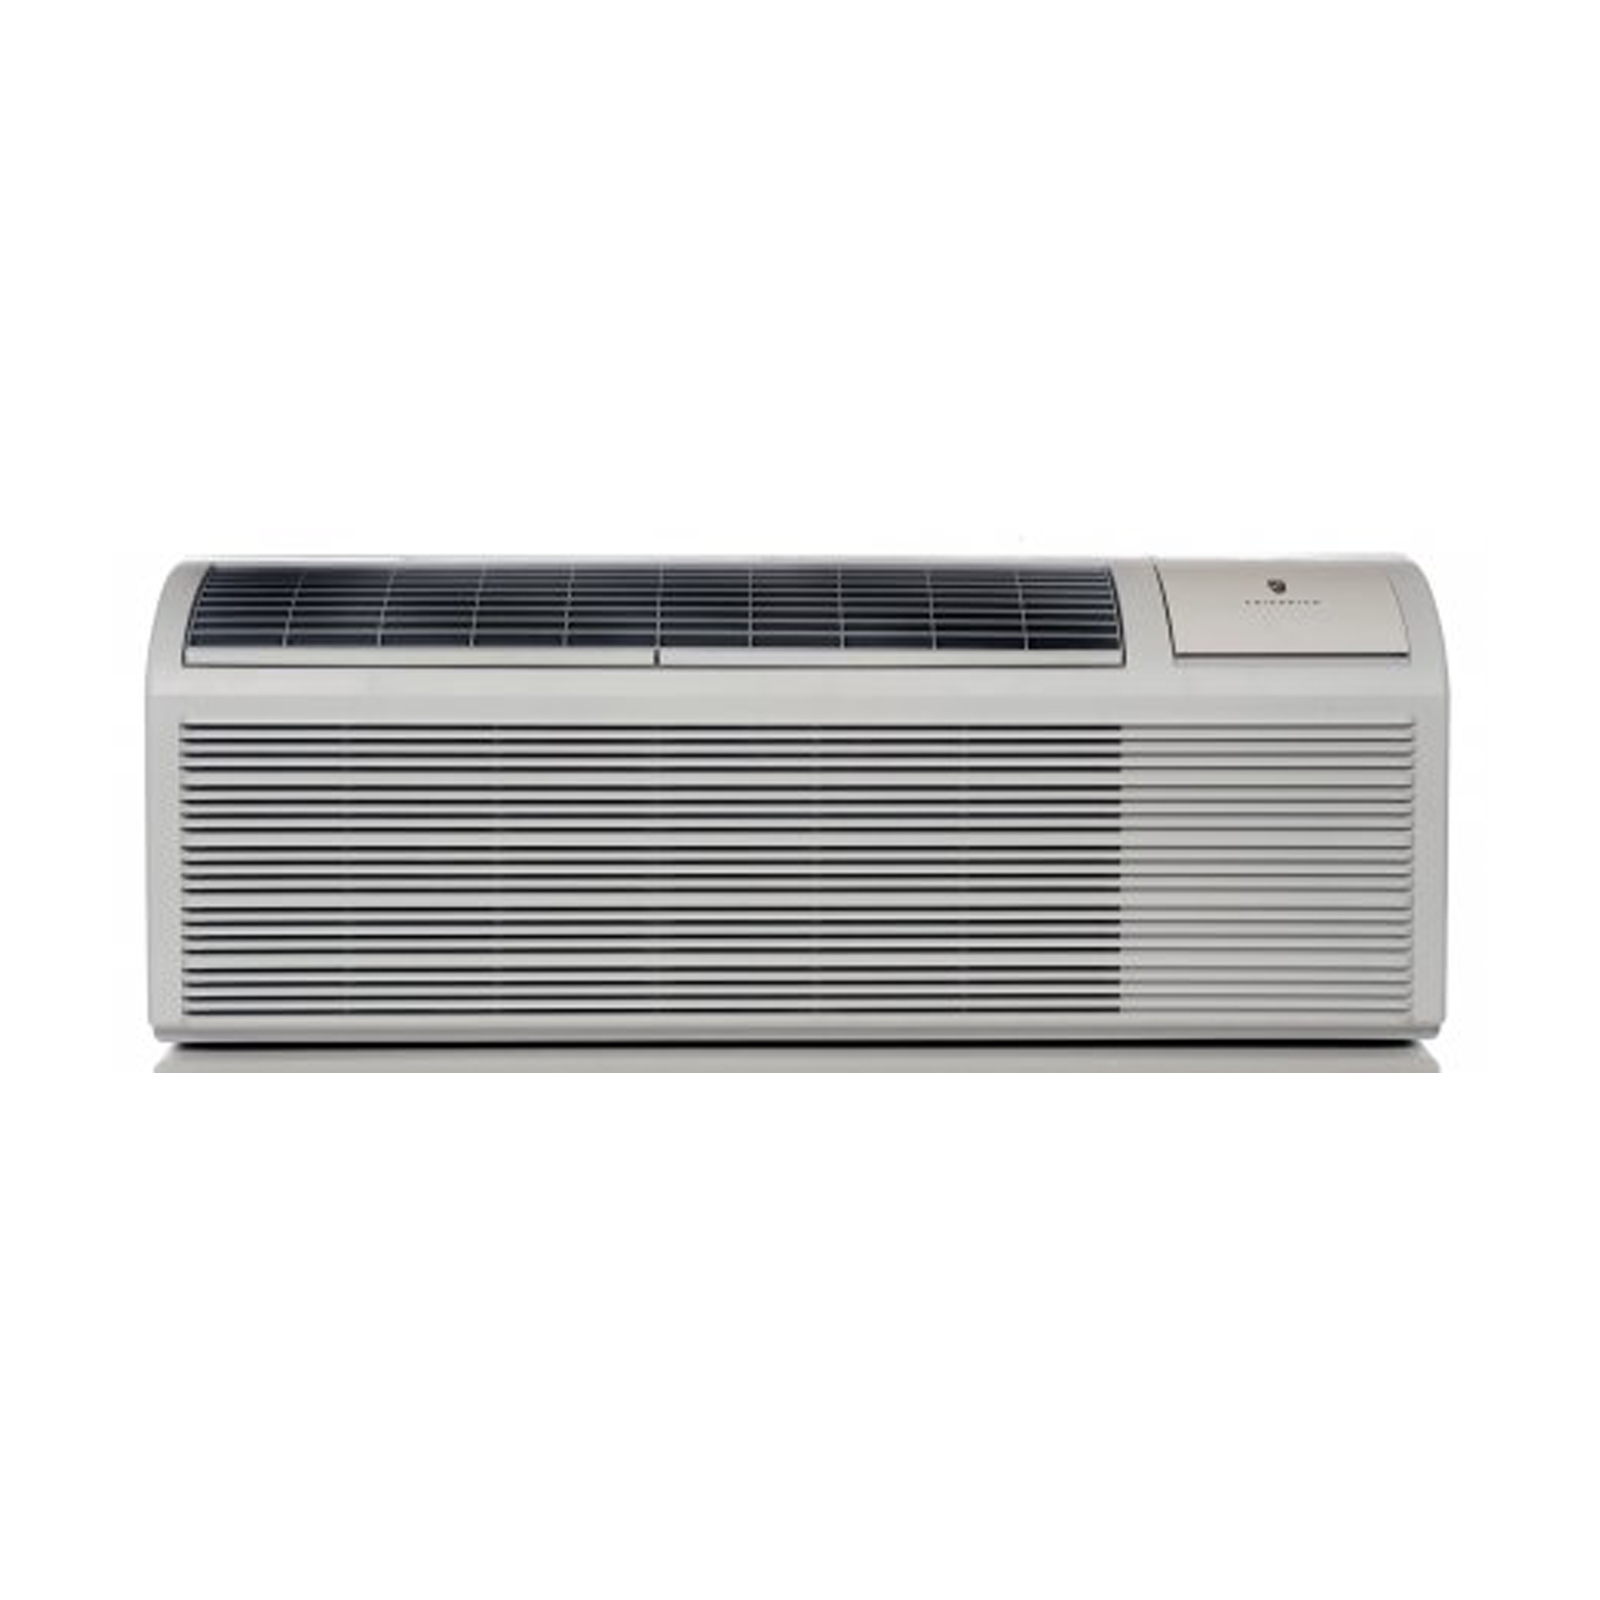 Friedrich PDE07R3SG 7200BTU Packaged Terminal Air Conditioner with Filters